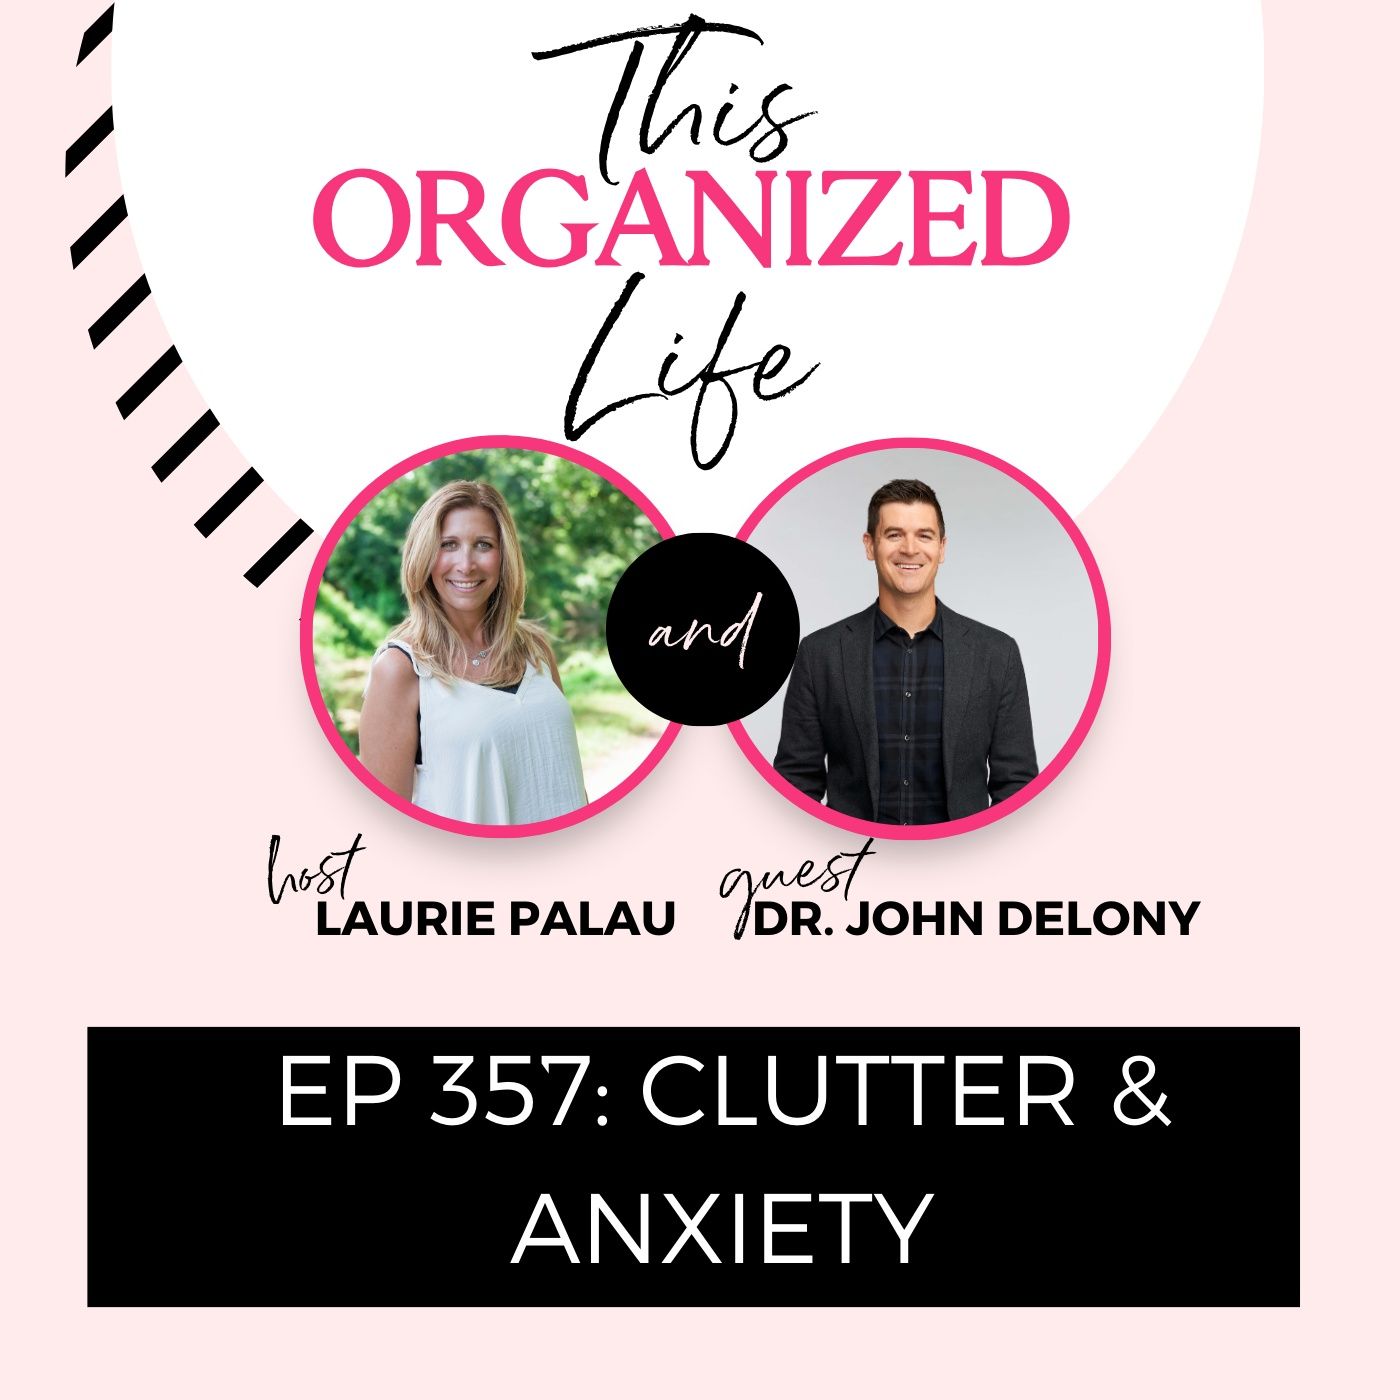 Clutter & Anxiety with Dr. John Delony | Ep 357